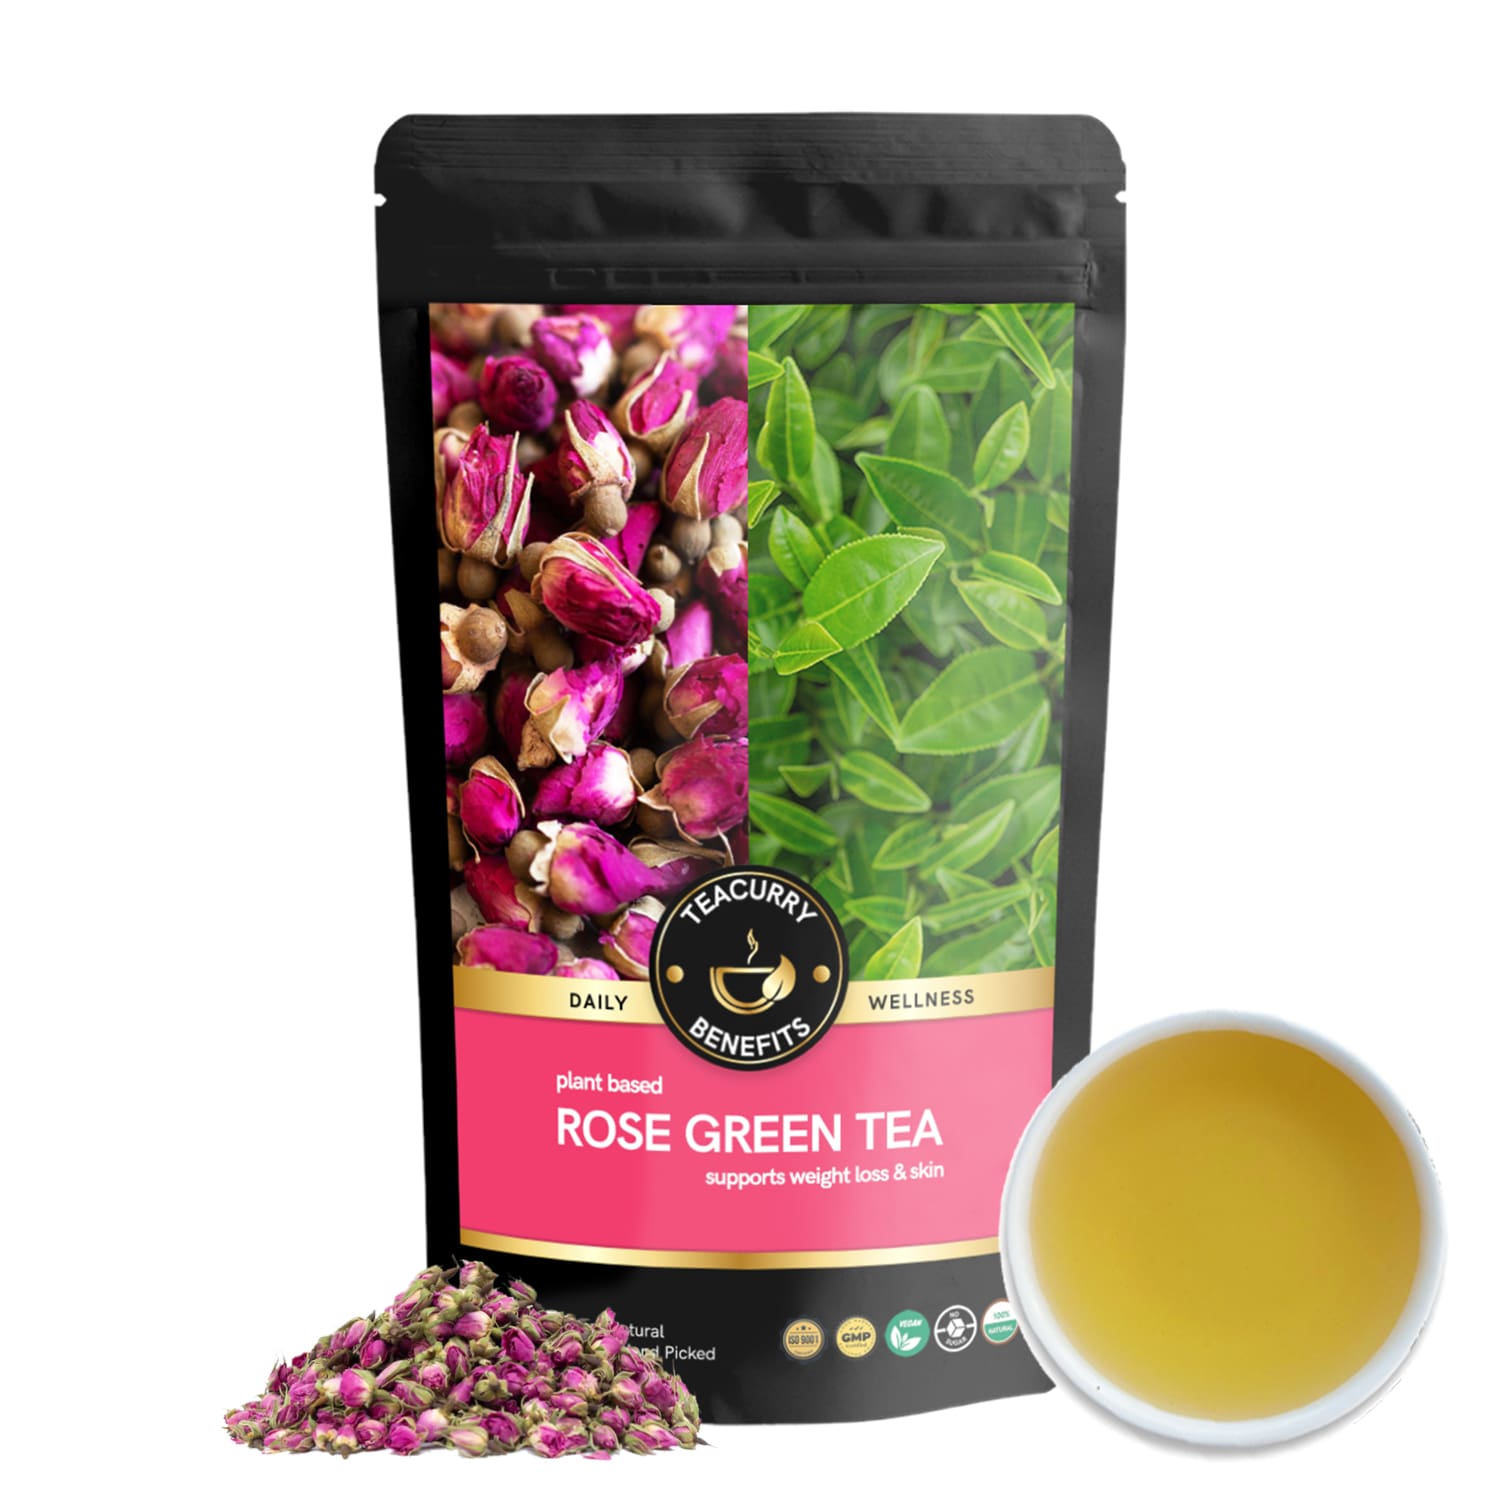 Rose Green Tea - Helps with Weight Loss, Skin Glow, Digestion